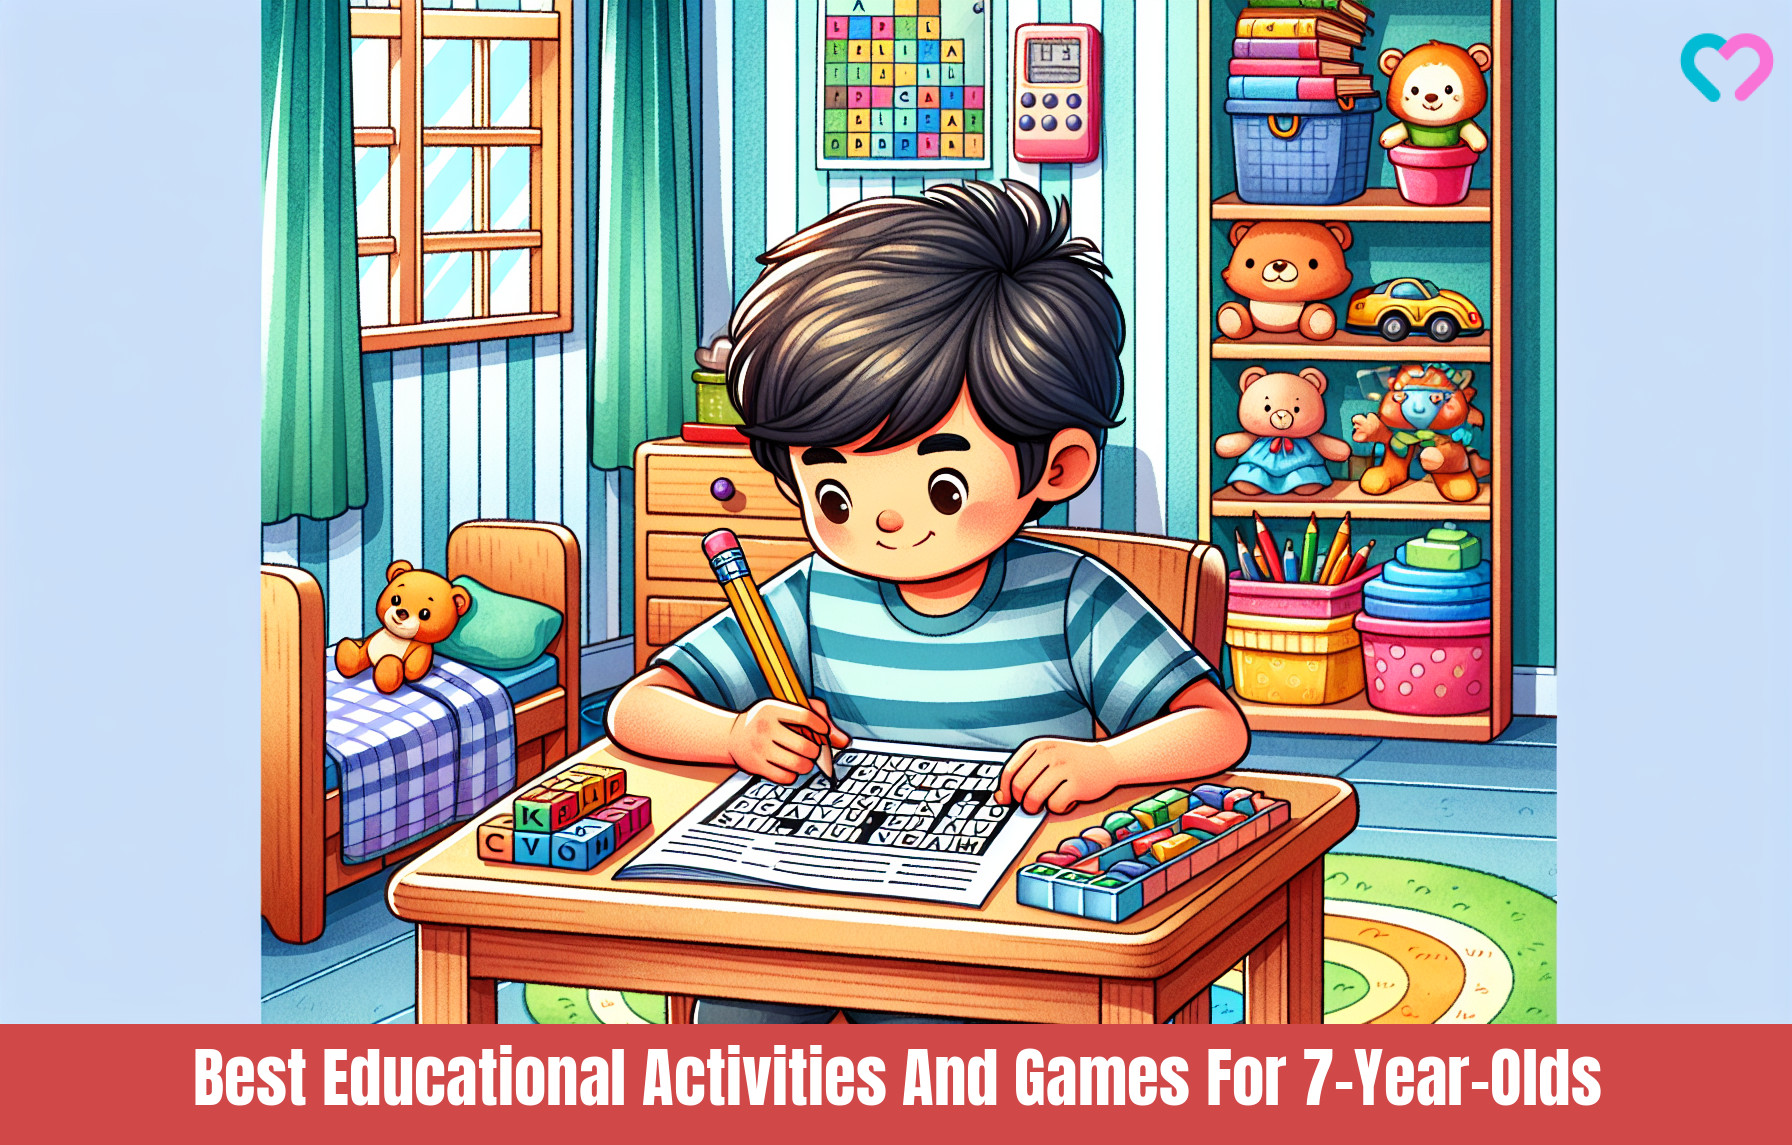 Games For 7-Year-Olds_illustration